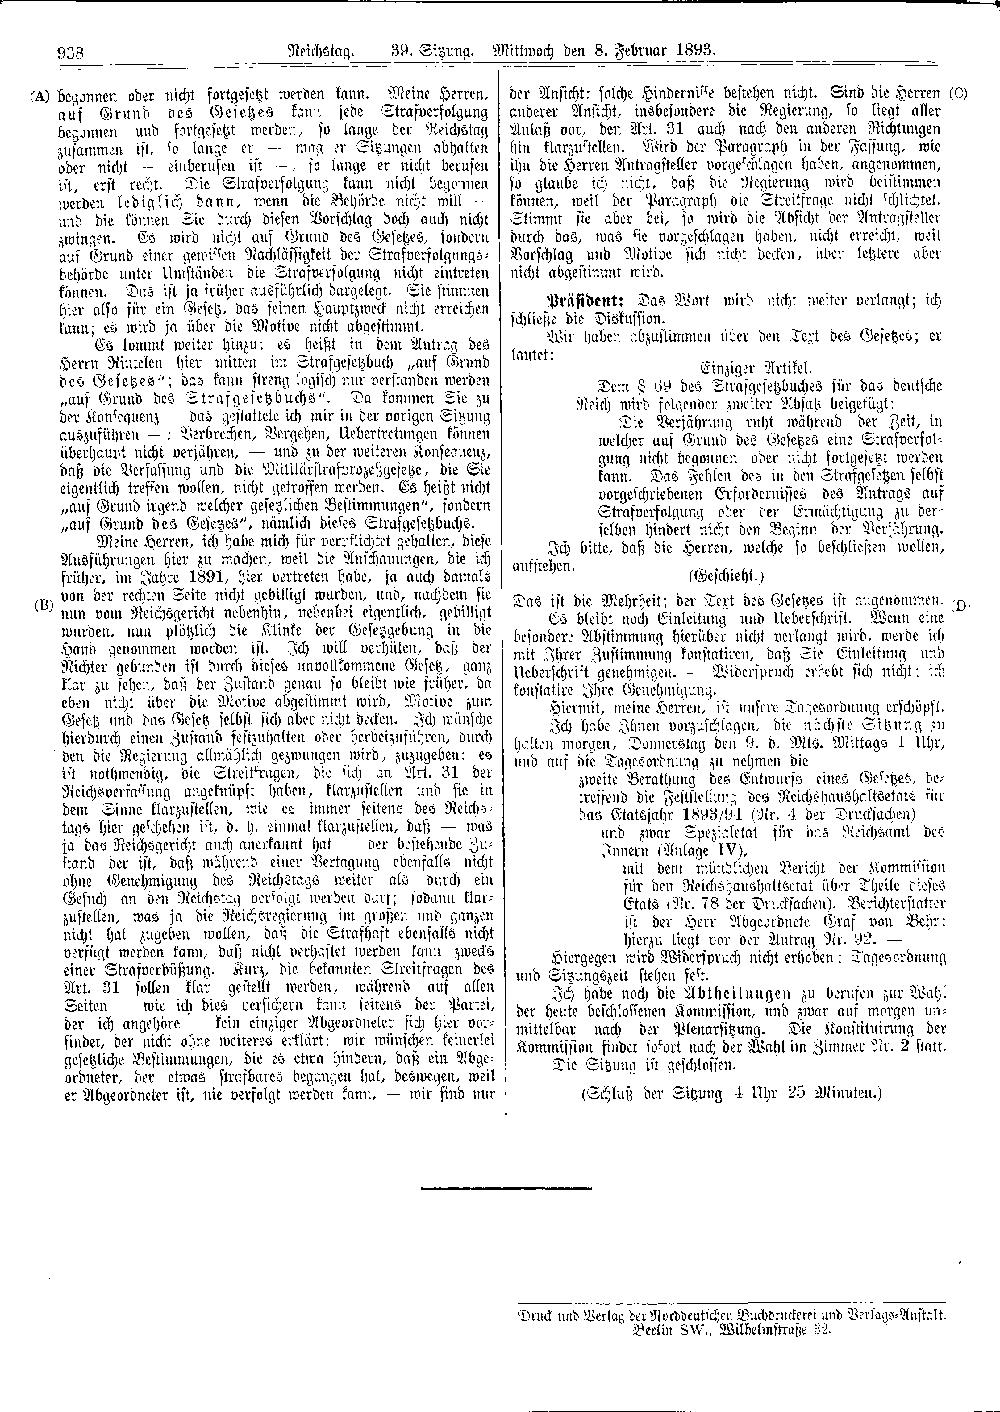 Scan of page 938